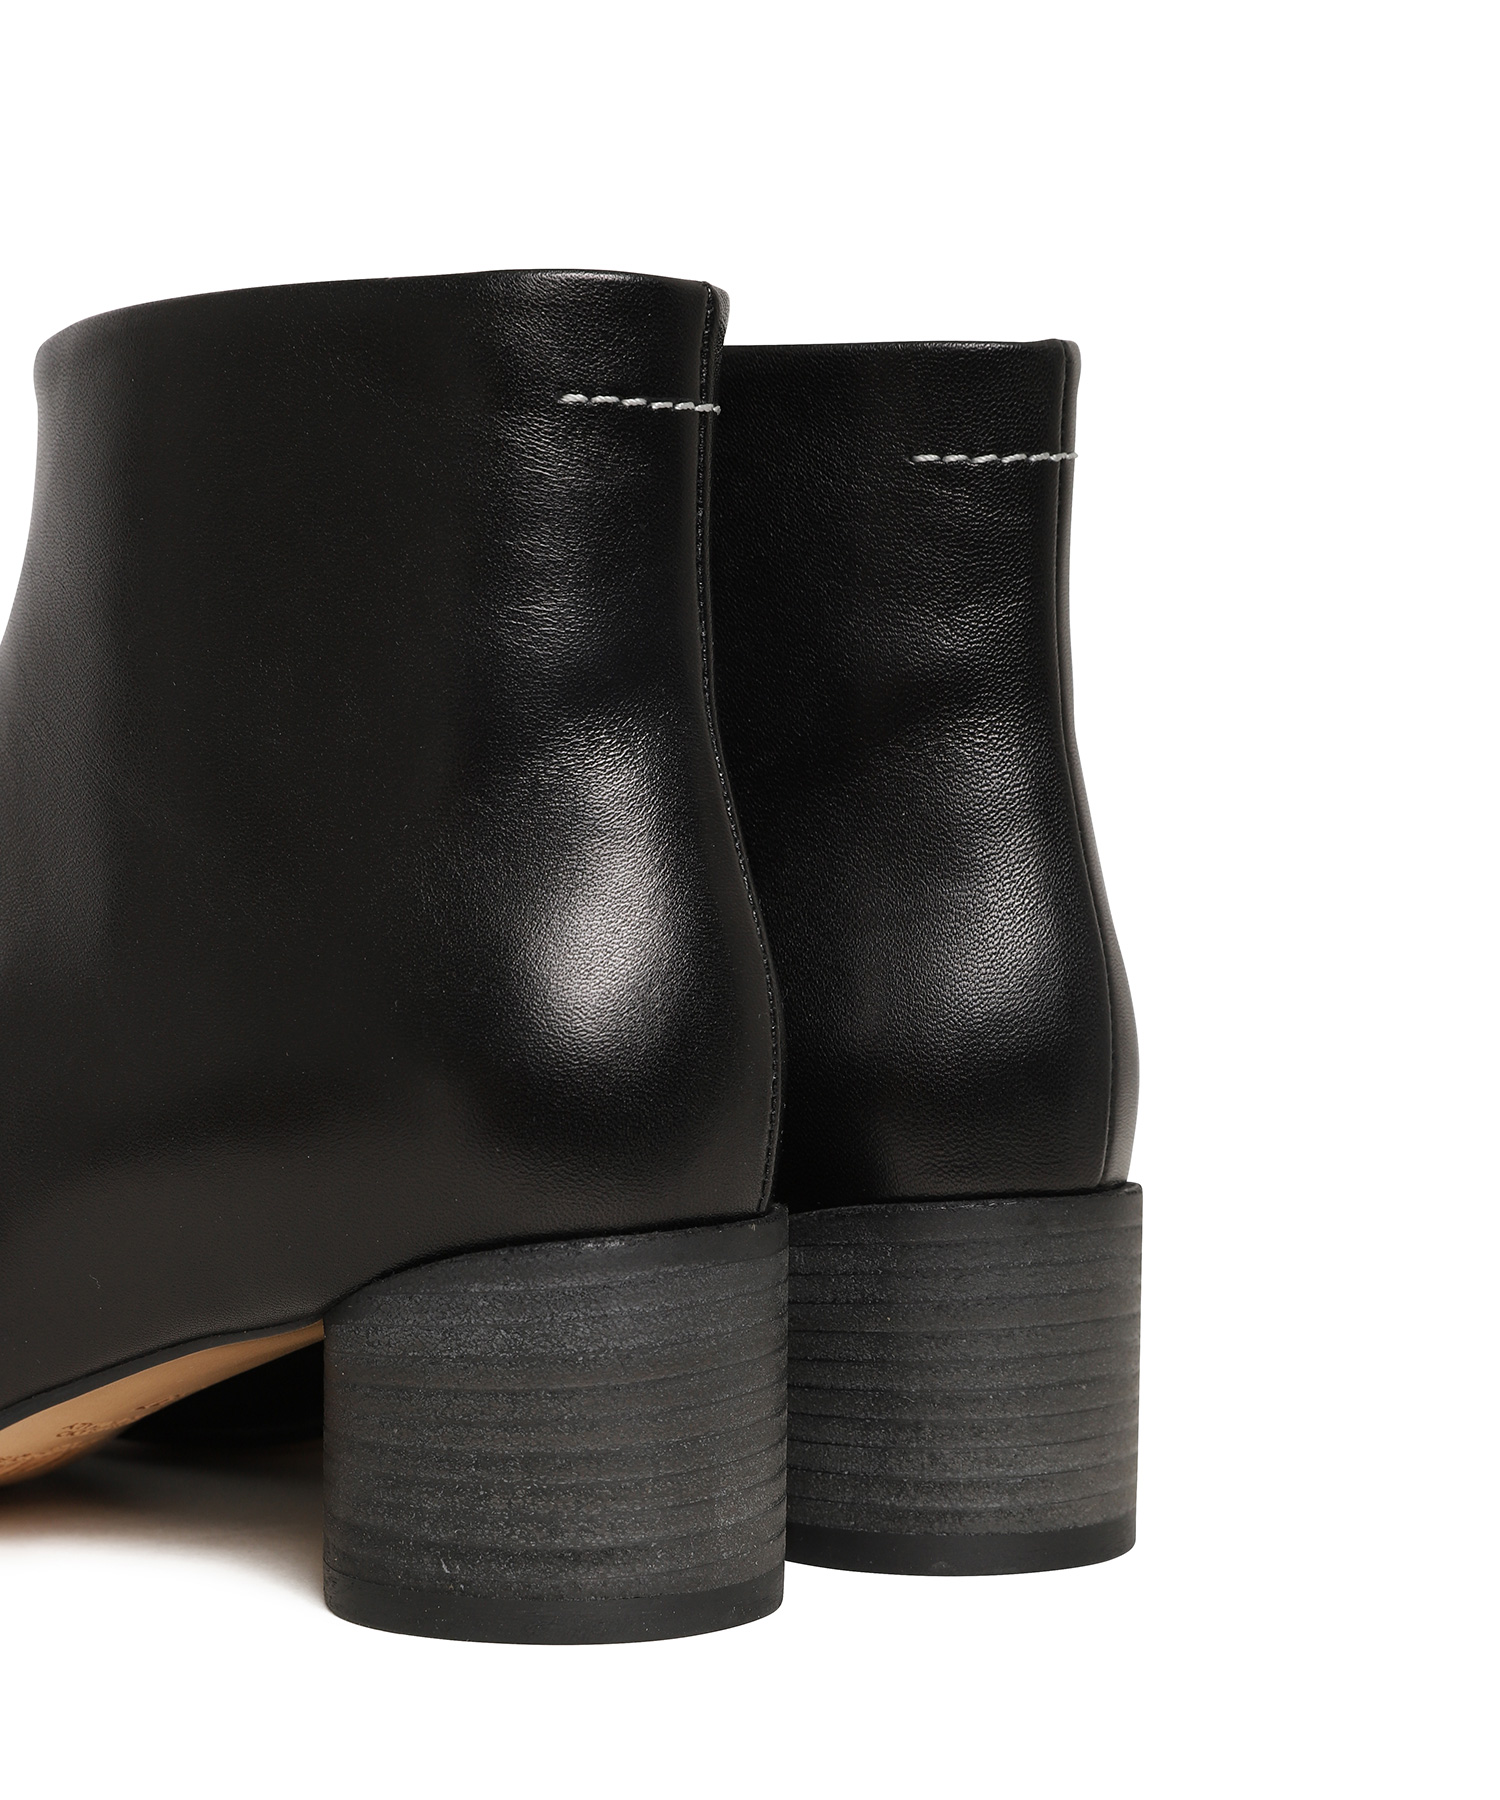 Anatomic Ankle BOOTS（MM6 Maison Margiela）｜TATRAS CONCEPT STORE タトラス公式通販サイト